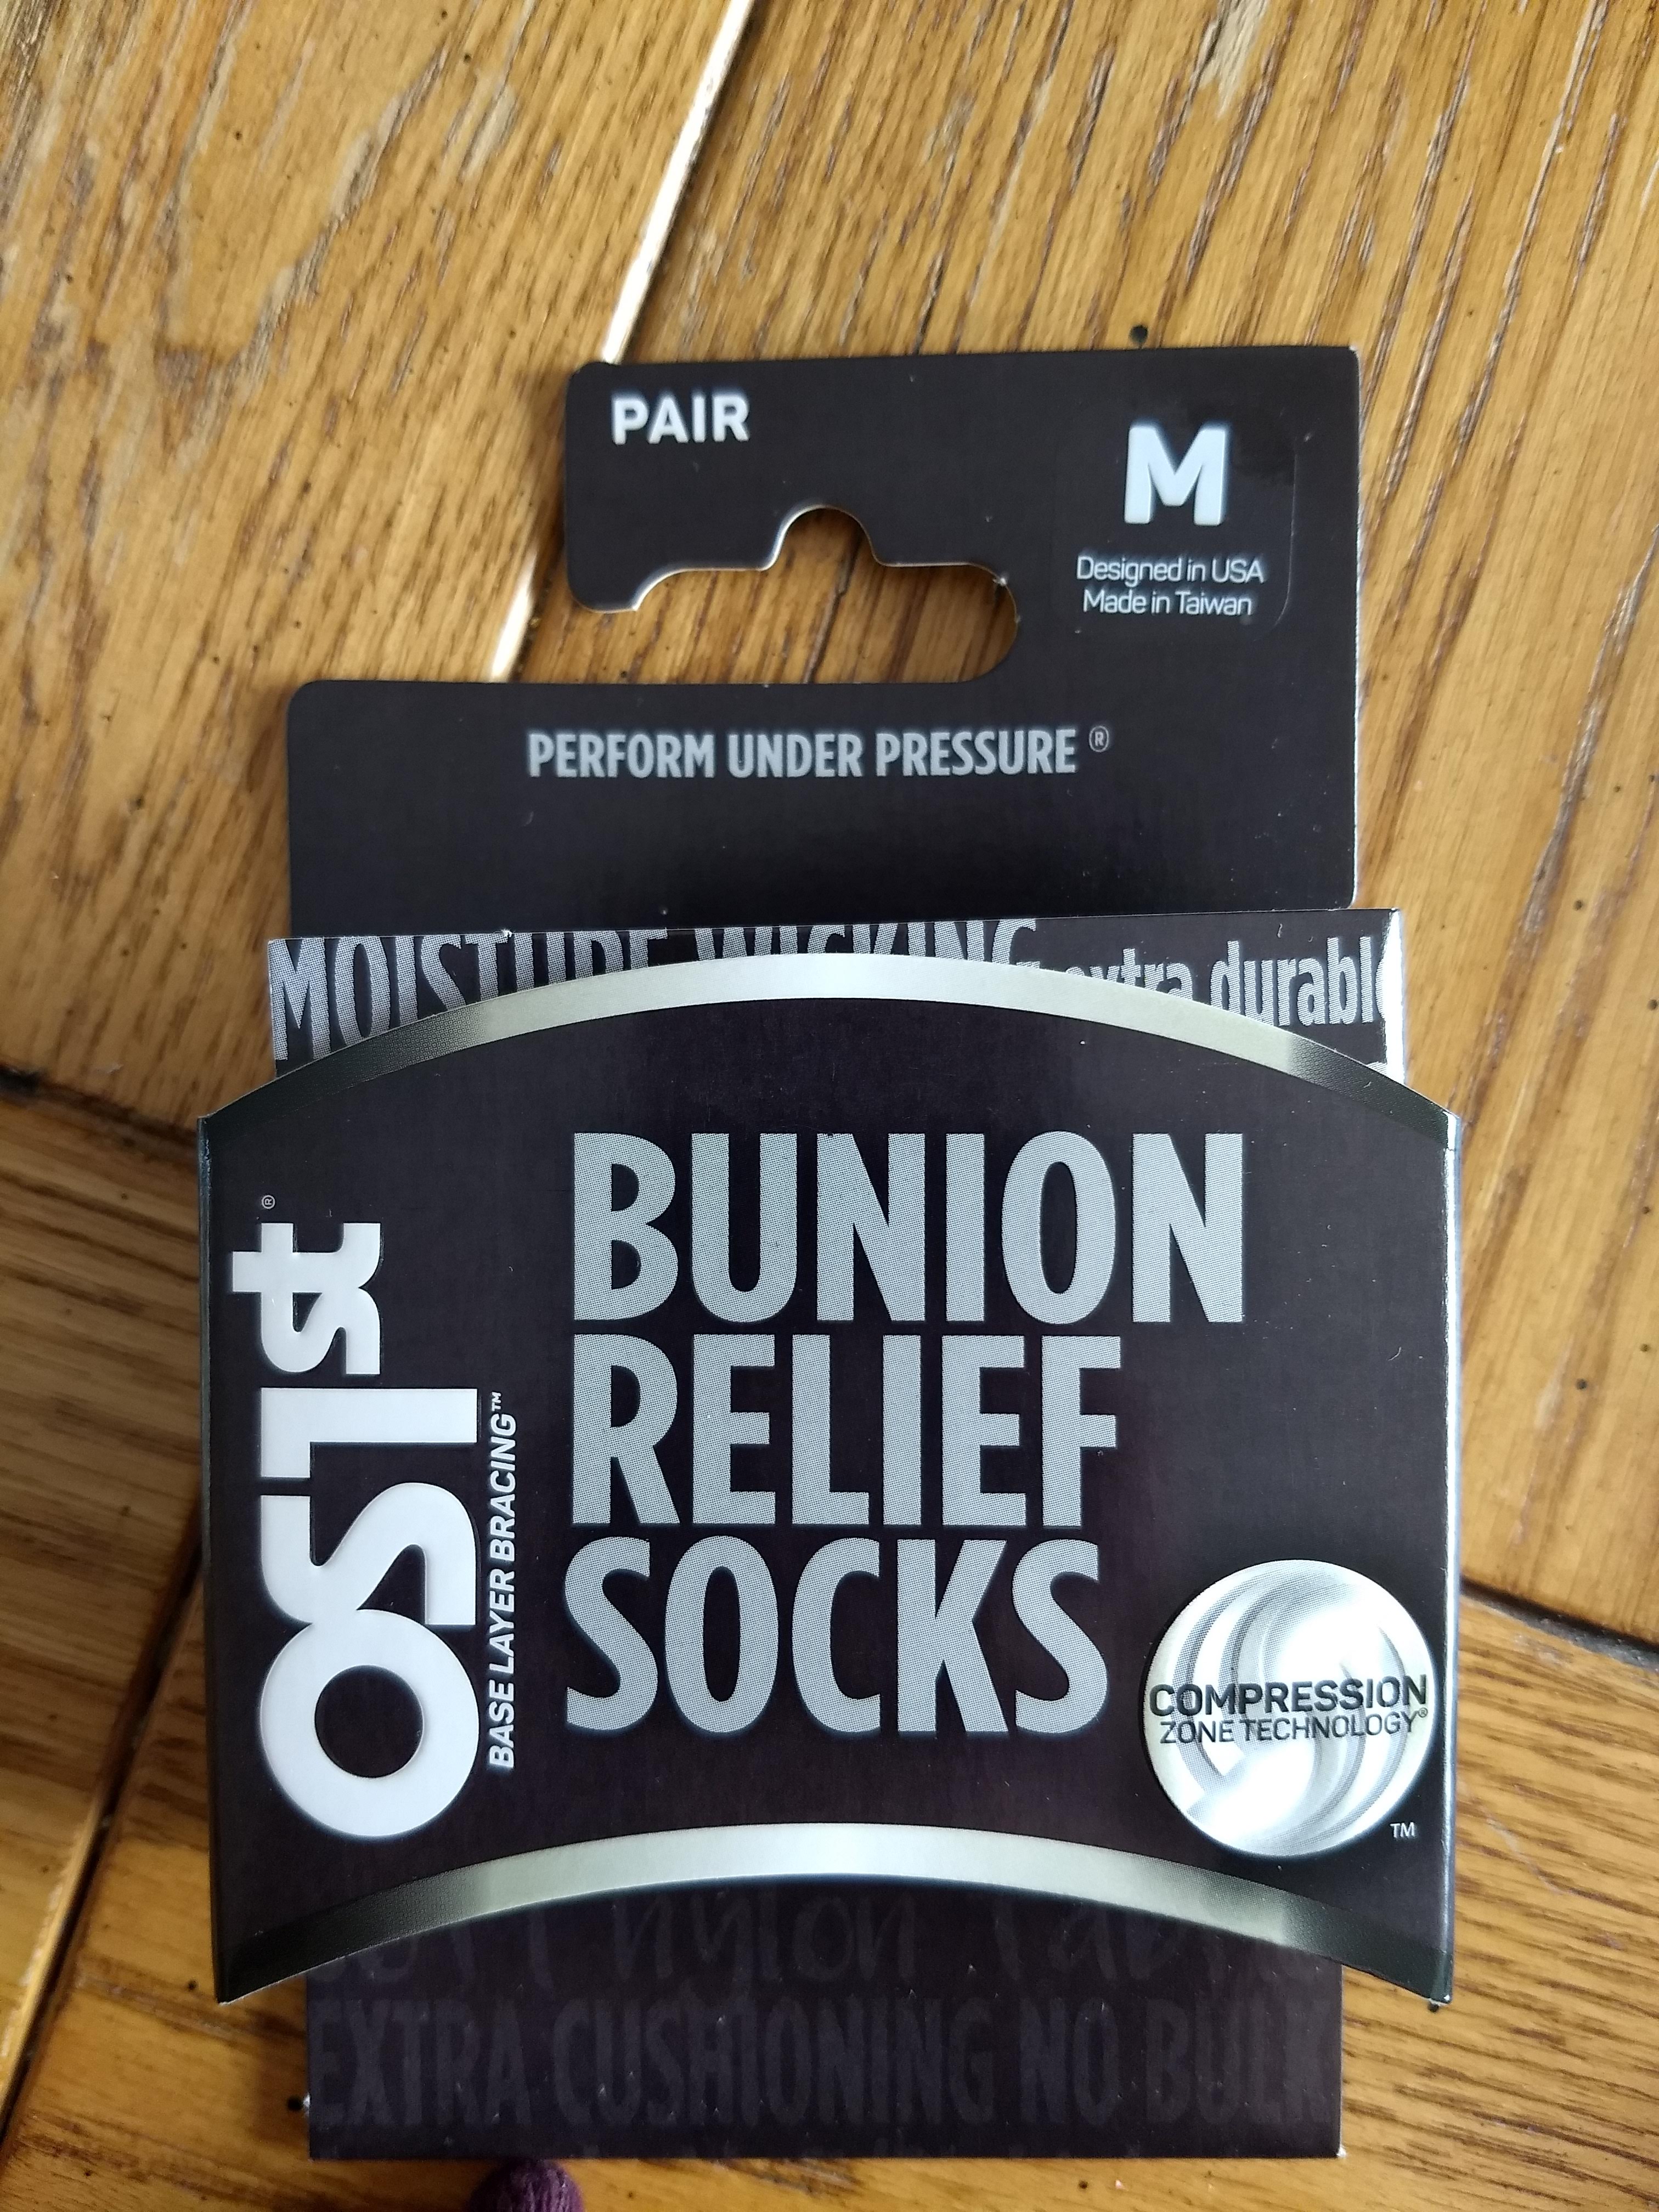 are compression socks good for bunions